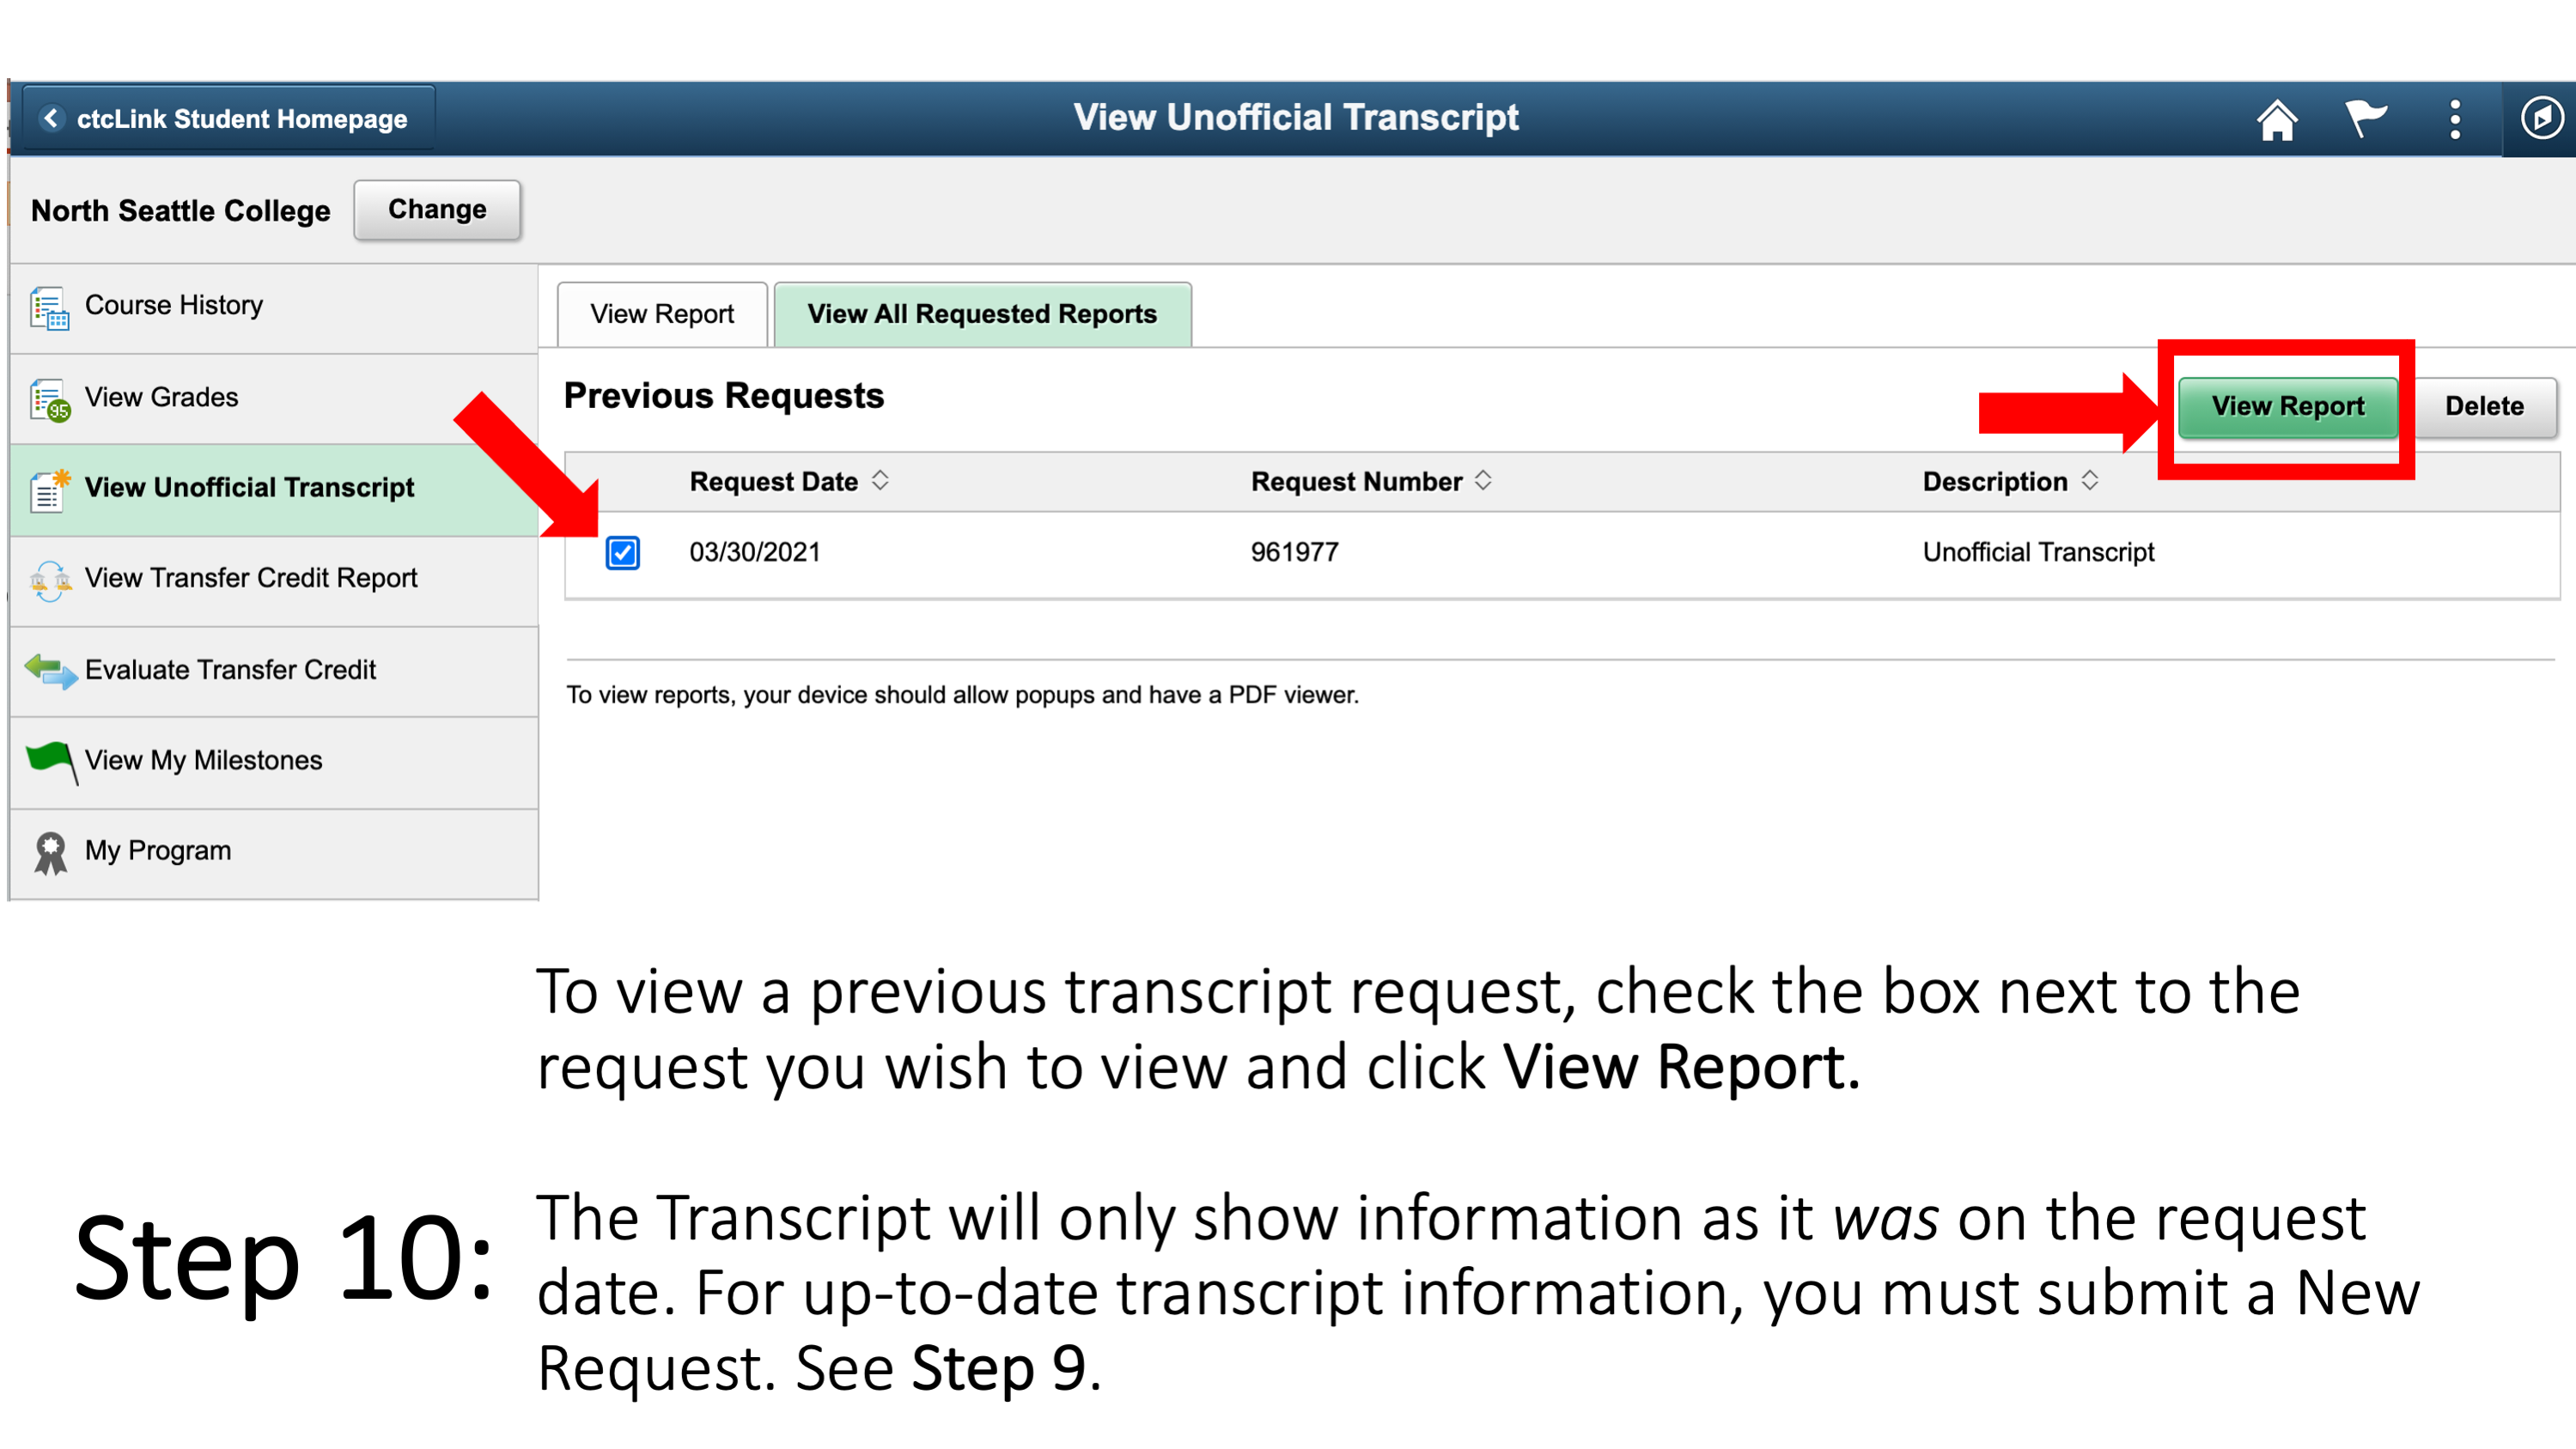 Step 10: To view a previous transcript request, check the box next to the request you wish to view and click View Report. The Transcript will only show information as it was on the request date. For up-to-date transcript information, you must submit a New Request. See Step 9. 